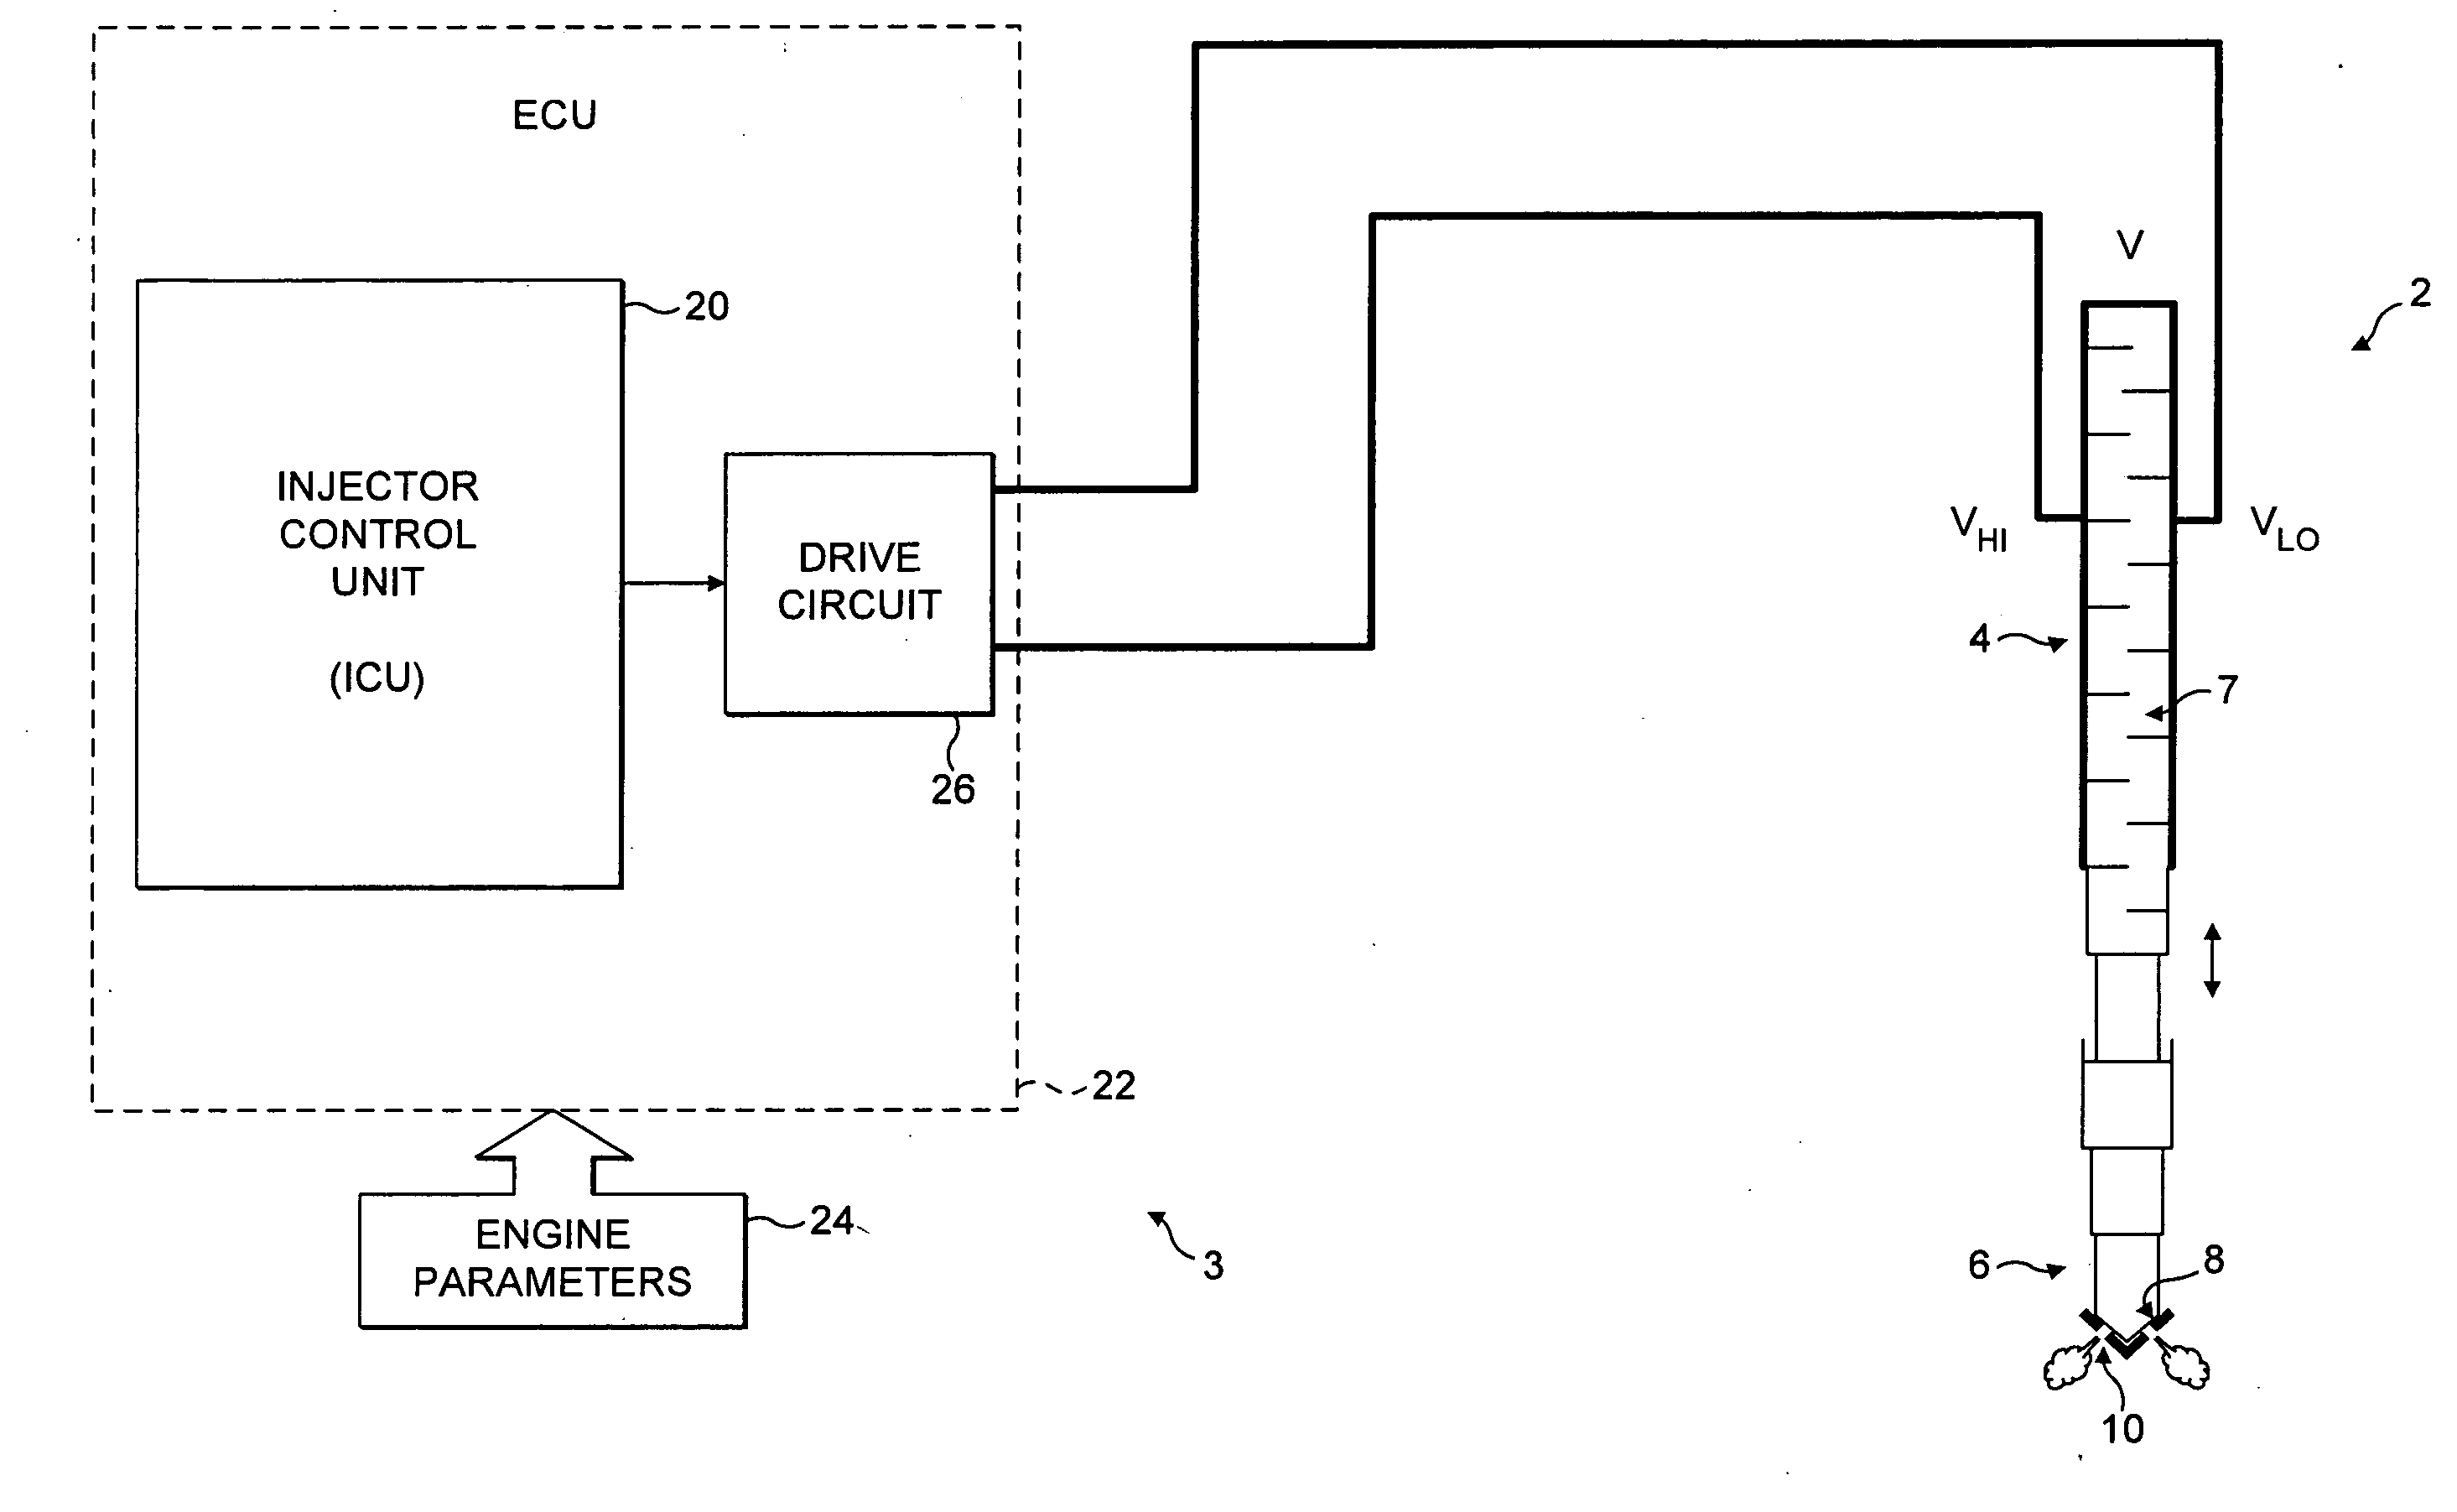 Method of operating a fuel injector